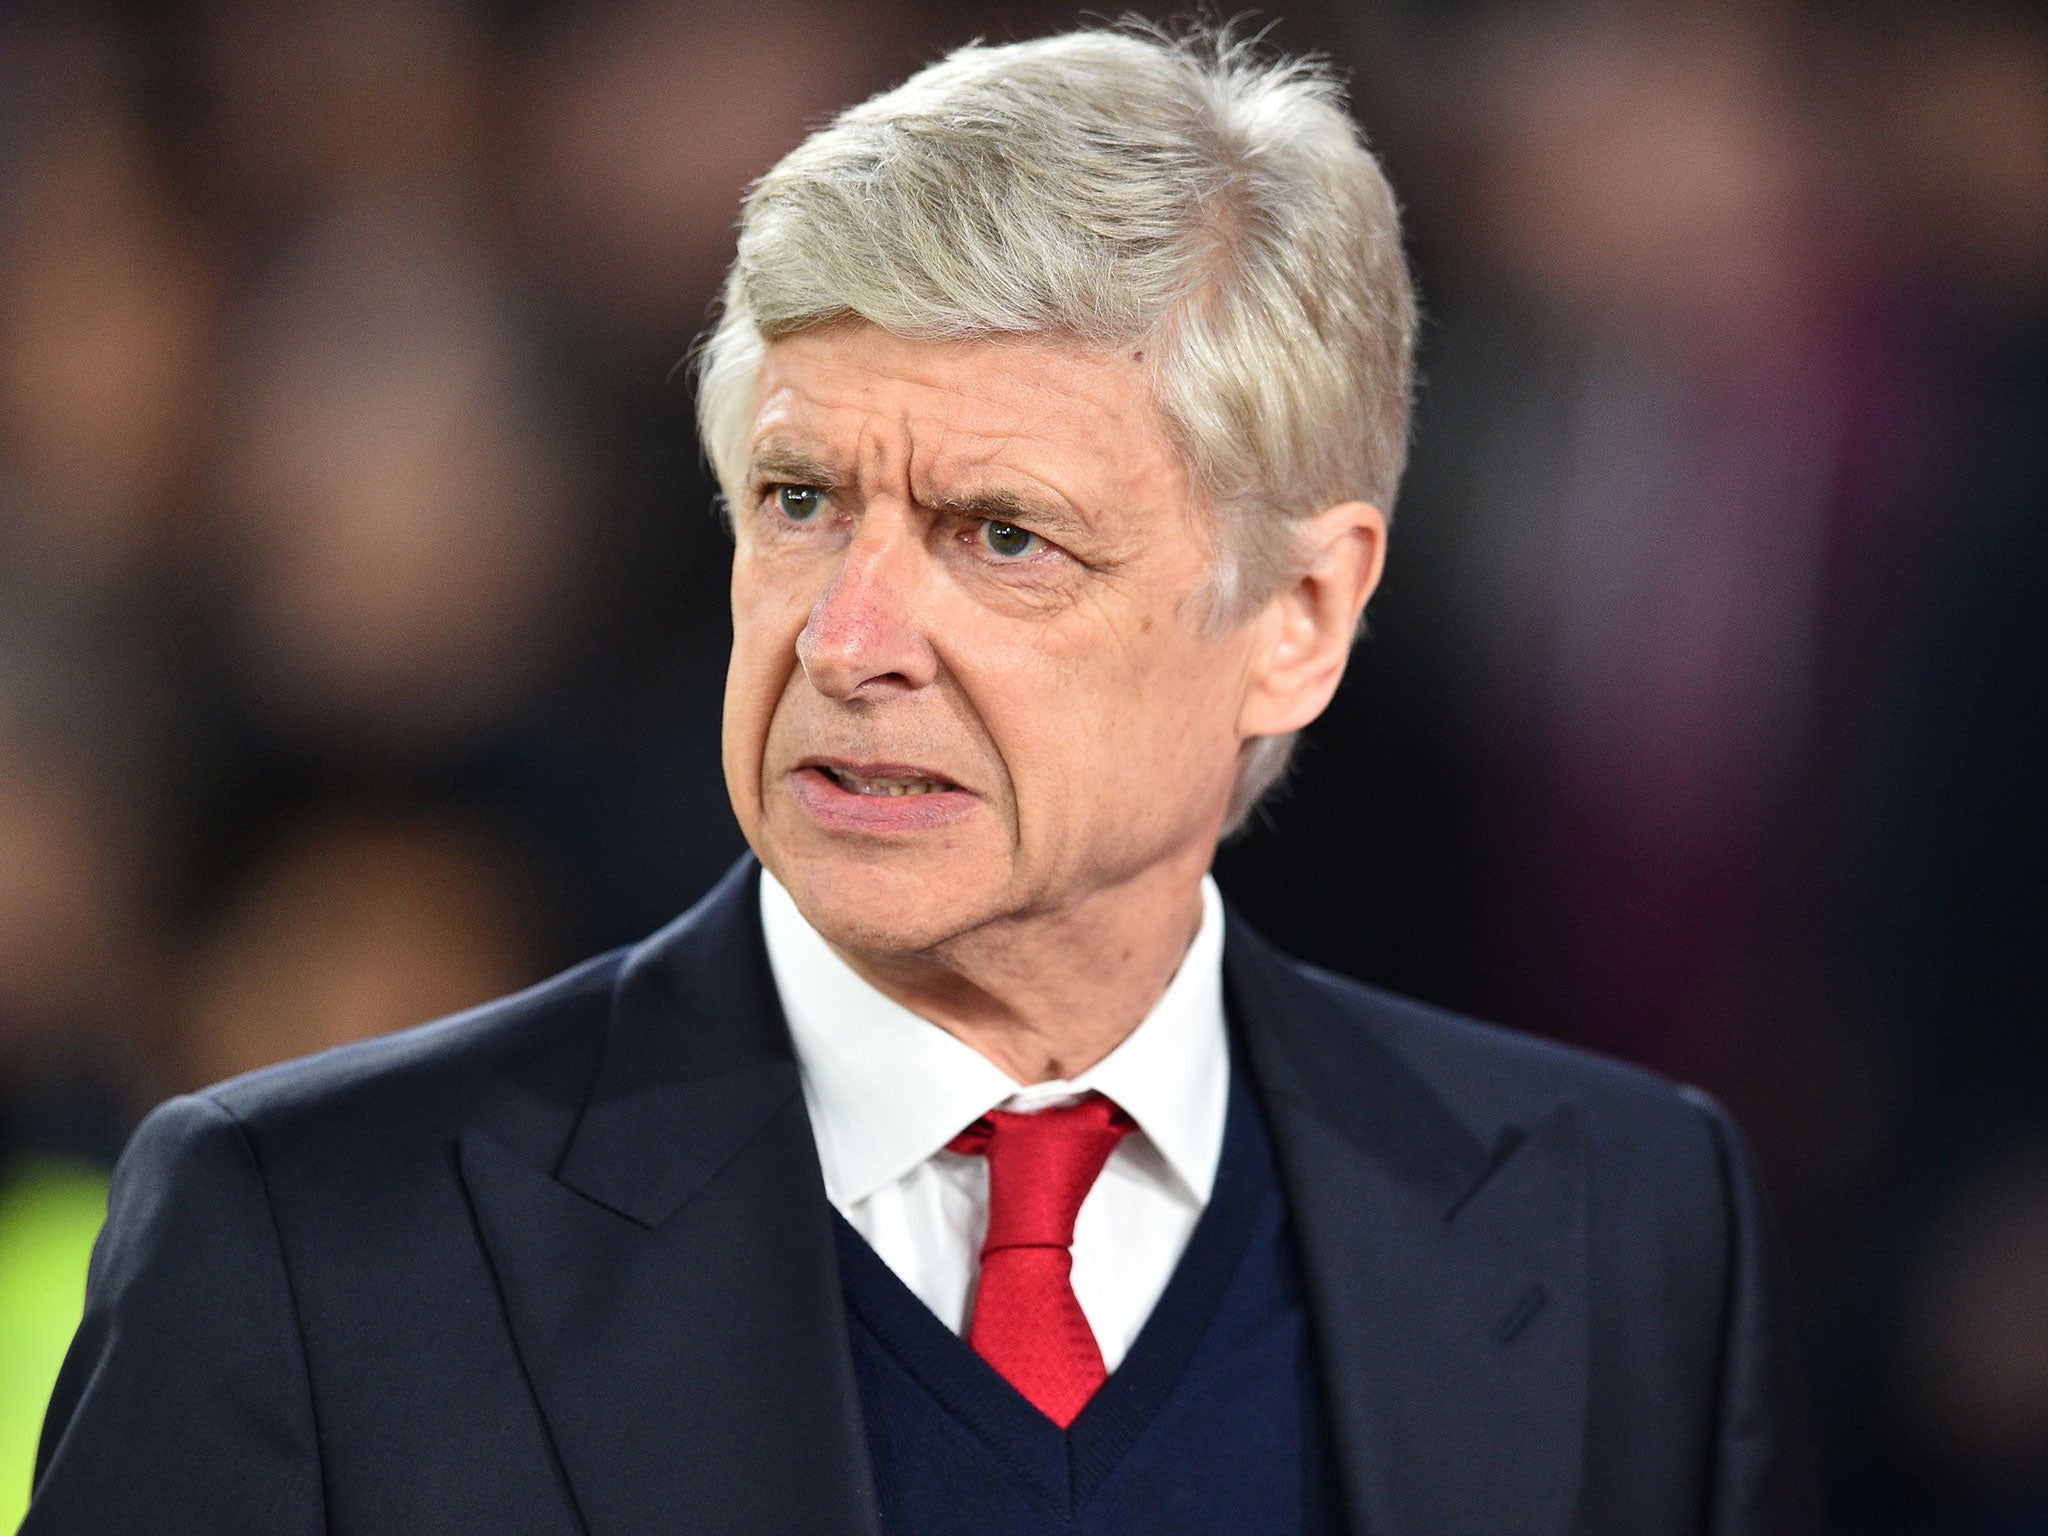 Arsene Wenger is yet to make public whether he intends to stay at Arsenal or not